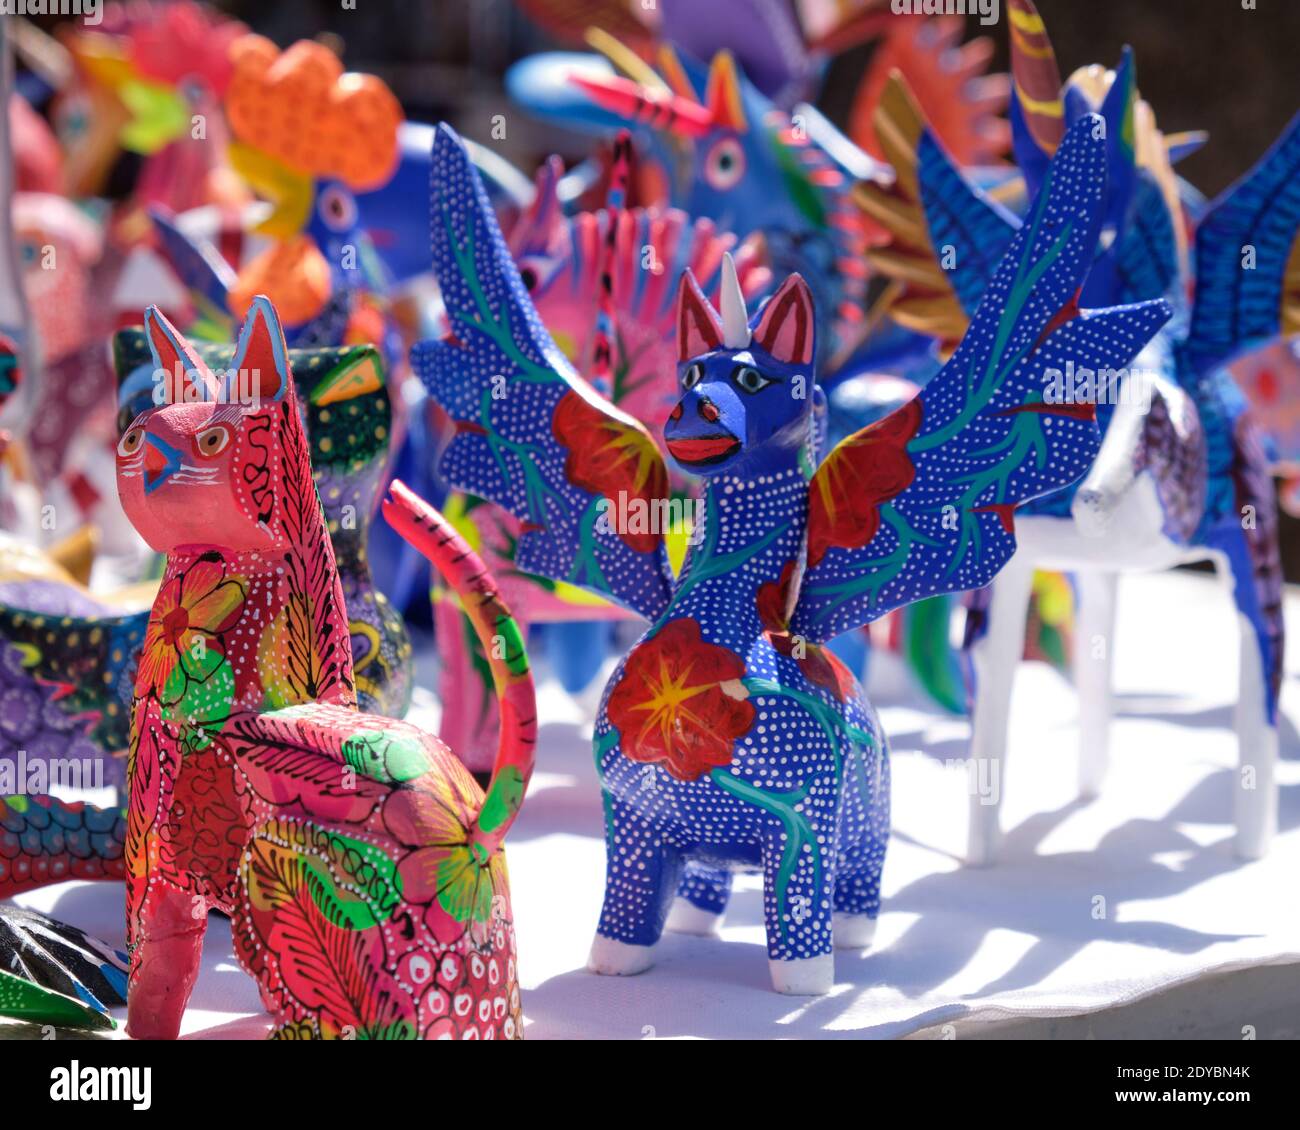 An Alebrijes, whimsical carvings depicting an imaginary winged creatures painted with intense colors and intricate patterns on Market table in Mexico Stock Photo